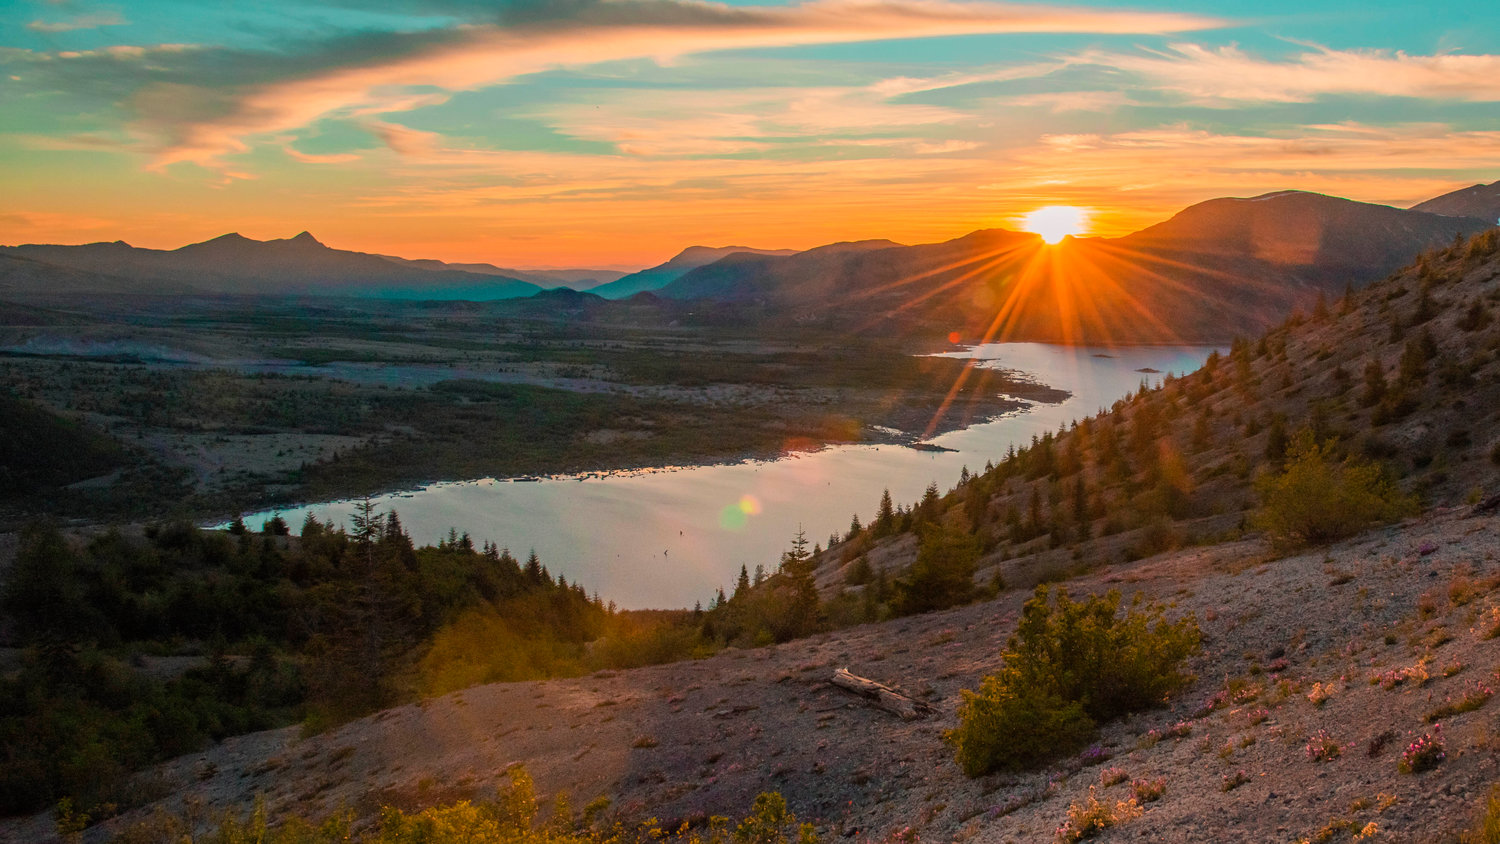 The sun sets behind foothills over Spirit Lake seen from the Windy Ridge Trail on Thursday near Mount St. Helens.